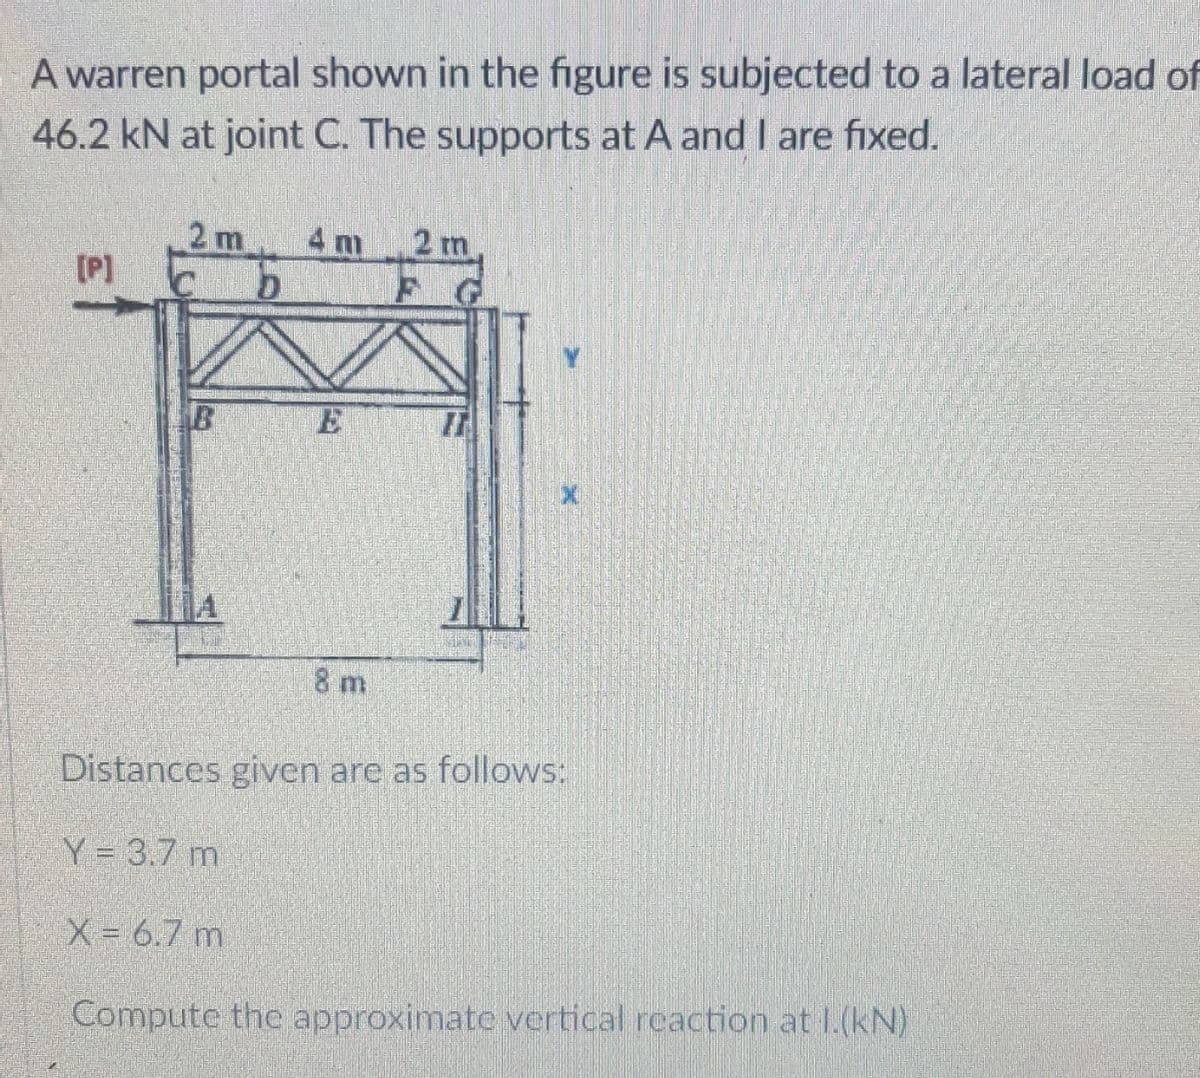 A warren portal shown in the figure is subjected to a lateral load of
46.2 kN at joint C. The supports at A and I are fixed.
2 m
[P]
4 m
2 m
B
8 m
Distances given are as follows:
Y = 3.7 m
X = 6.7 m
Compute the approximate vertical reaction at 1.(kN)
